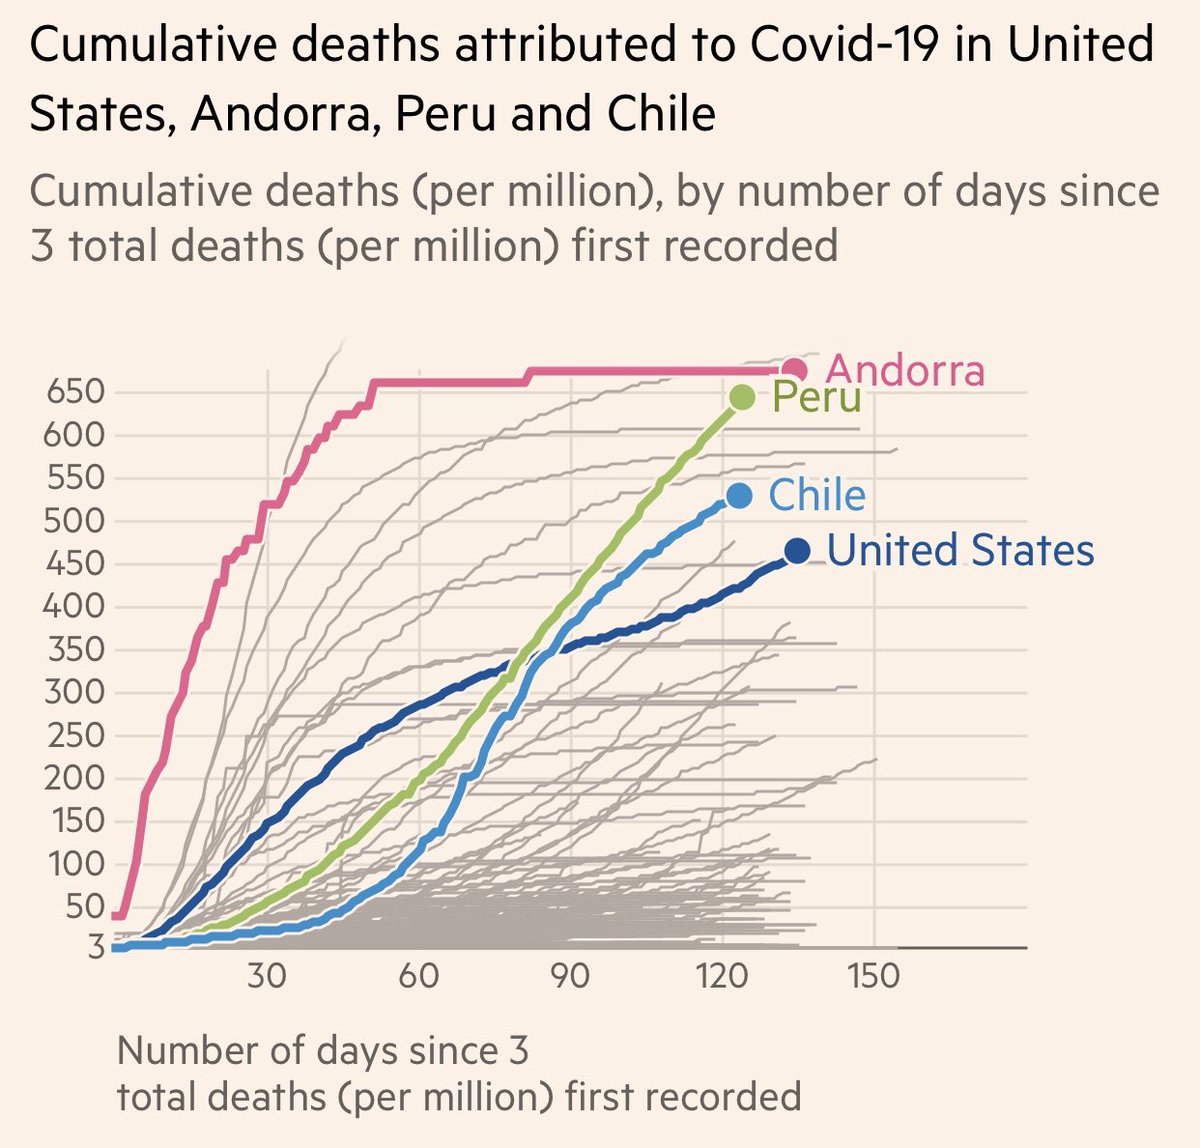 Well we won’t be lower that Belgium, UK, Spain, Italy, and Sweden for long, if we don’t slow down. The only other countries with deaths per million higher than us in the whole world are Andorra, Peru, and Chile. Brazil is just below us. 6/